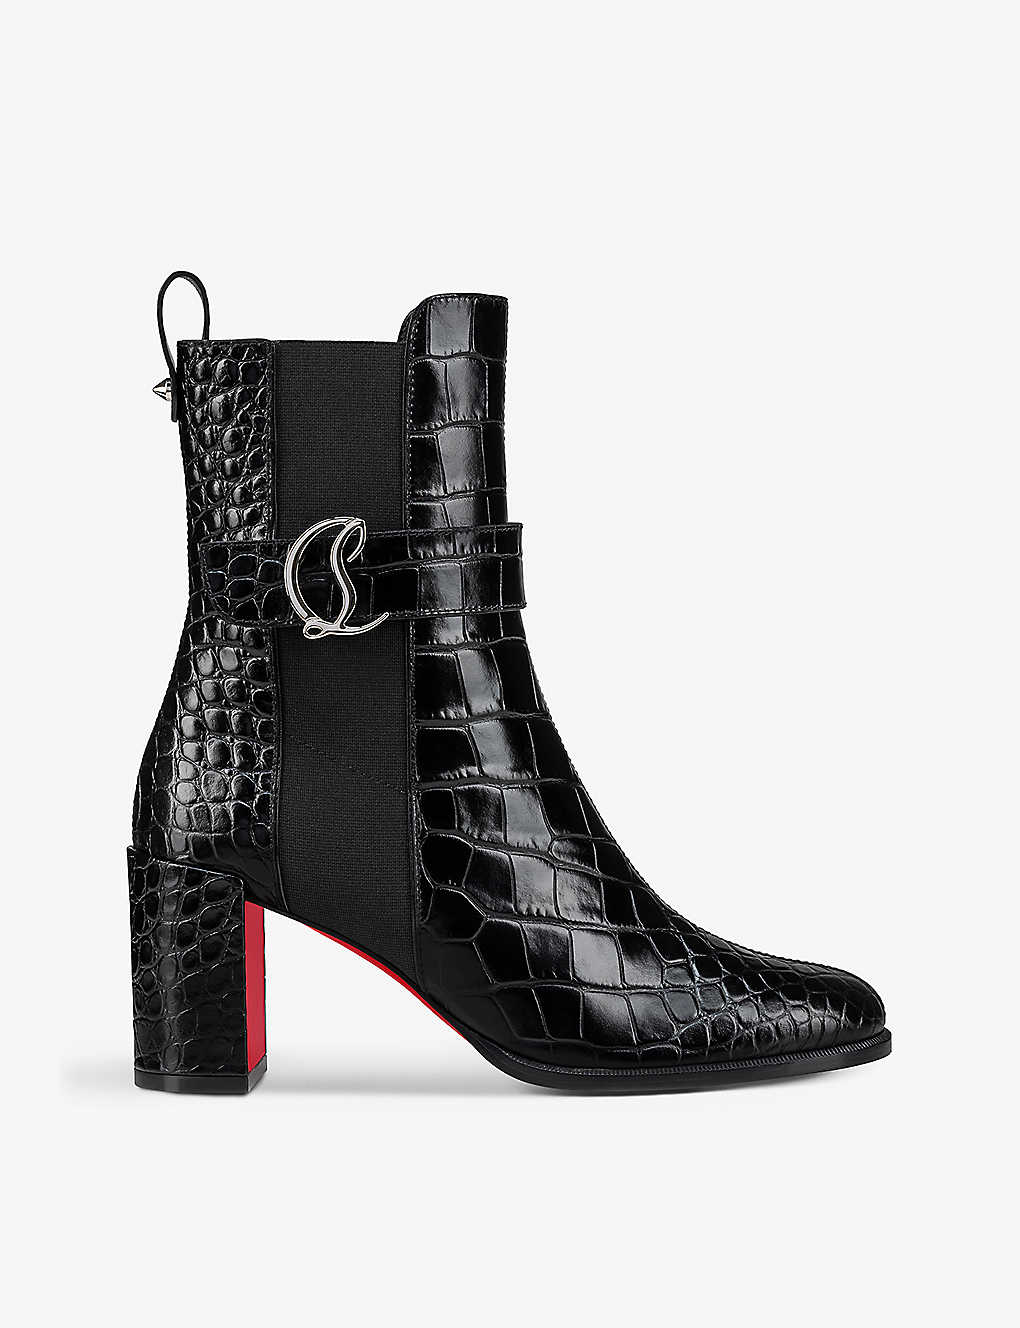 Christian Louboutin Cl Chelsea Booty Leather Boots 70 In Black